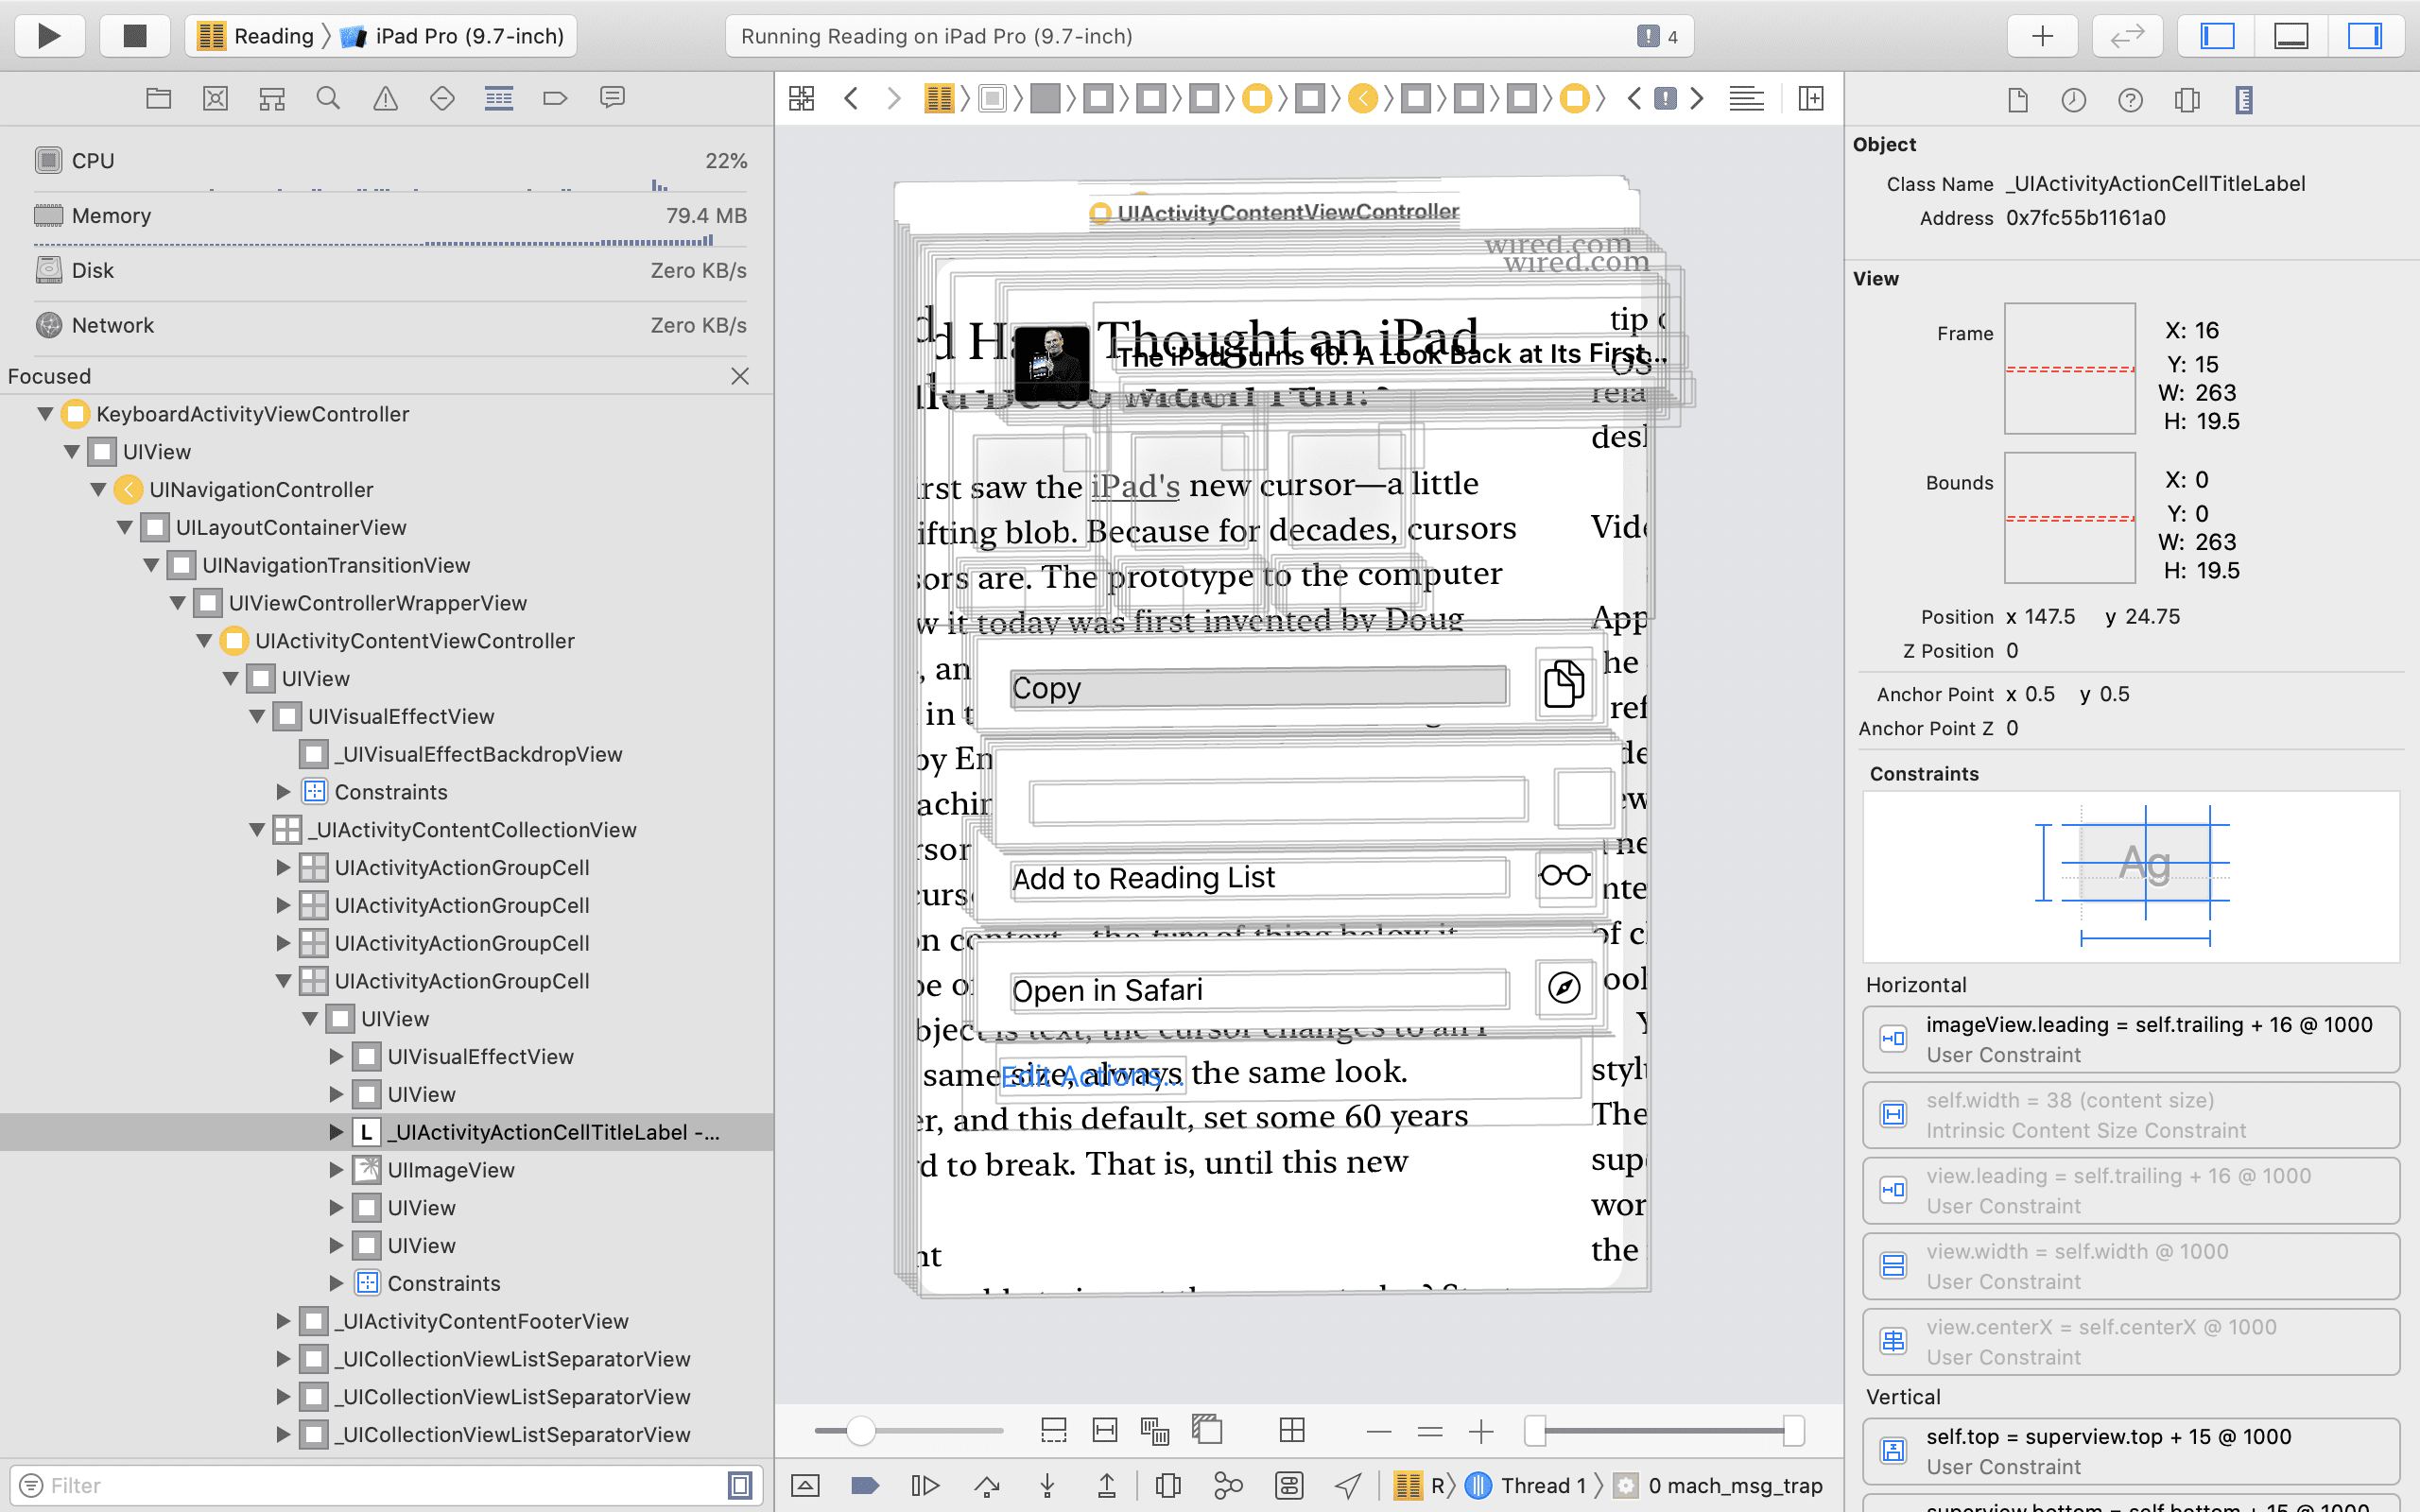 Screenshot of the Xcode view debugger showing the Copy item in the share sheet, then a blank row, then Add to Reading List, and finally Open in Safari.